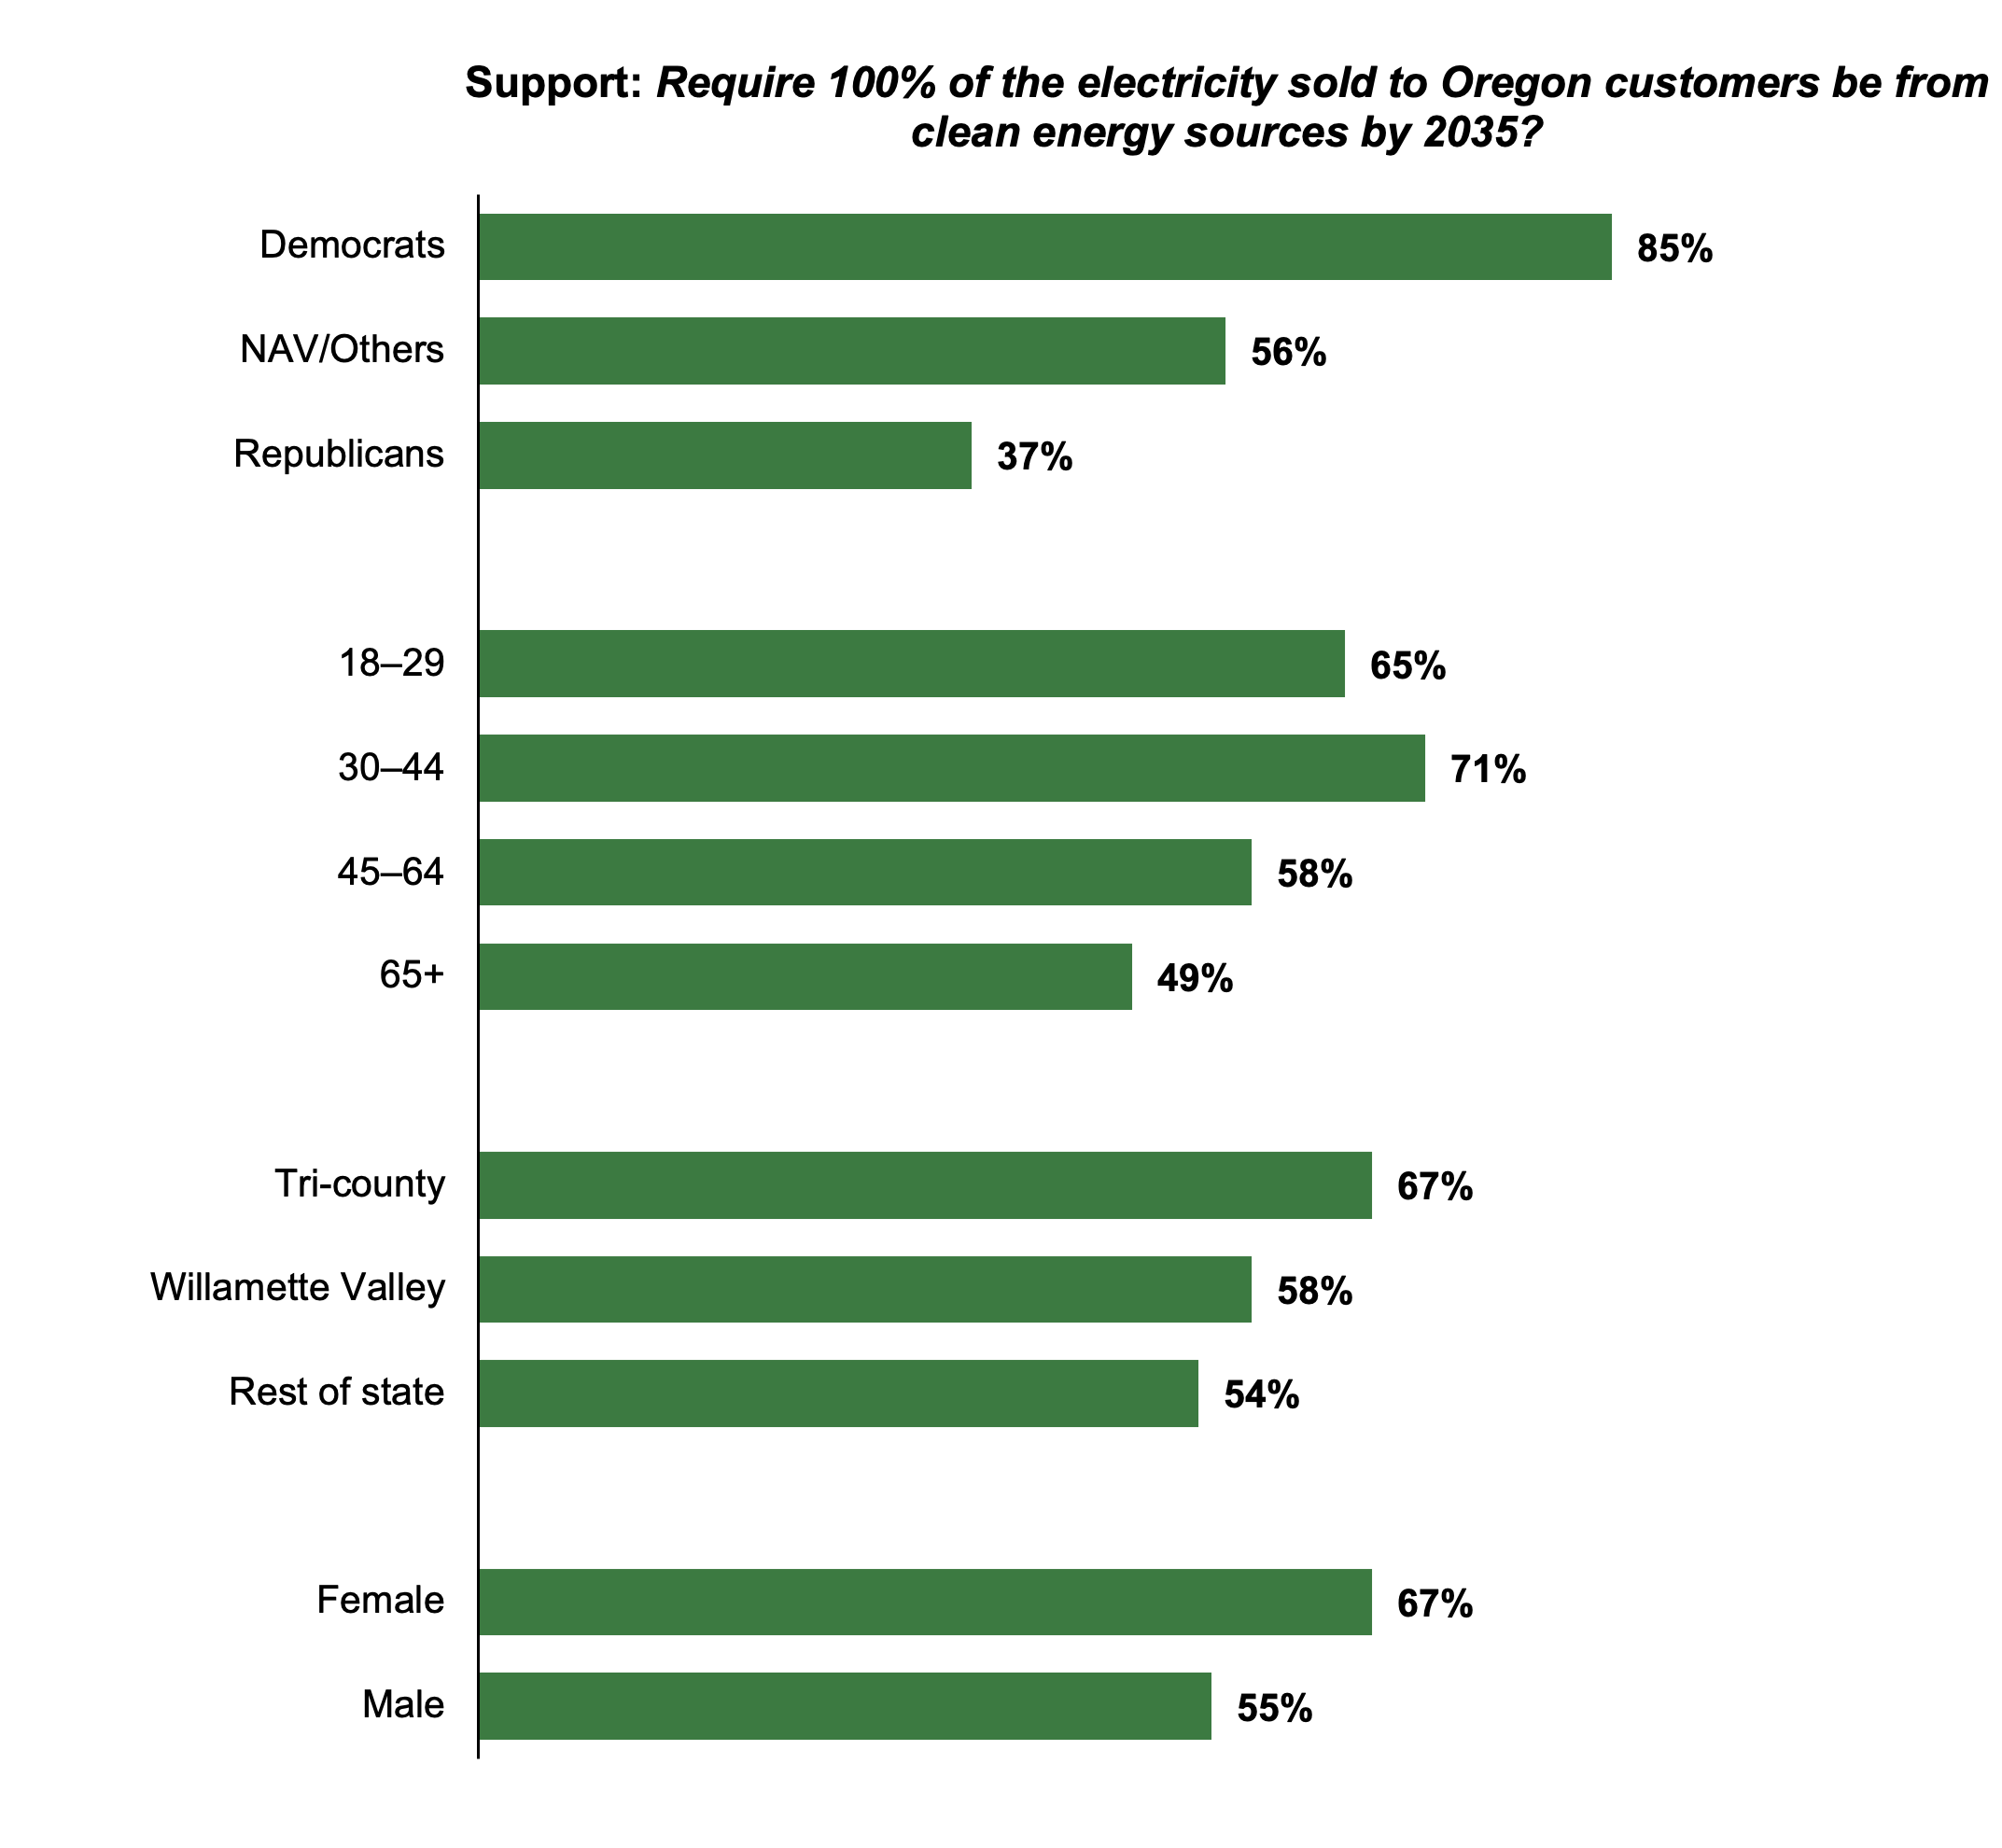 Bar graph results from asking Oregon residents if they support requiring 100% of the electricity sold to Oregon customers to come from clean energy sources by 2035. Separated by political affiliation, age, geography, and sex.